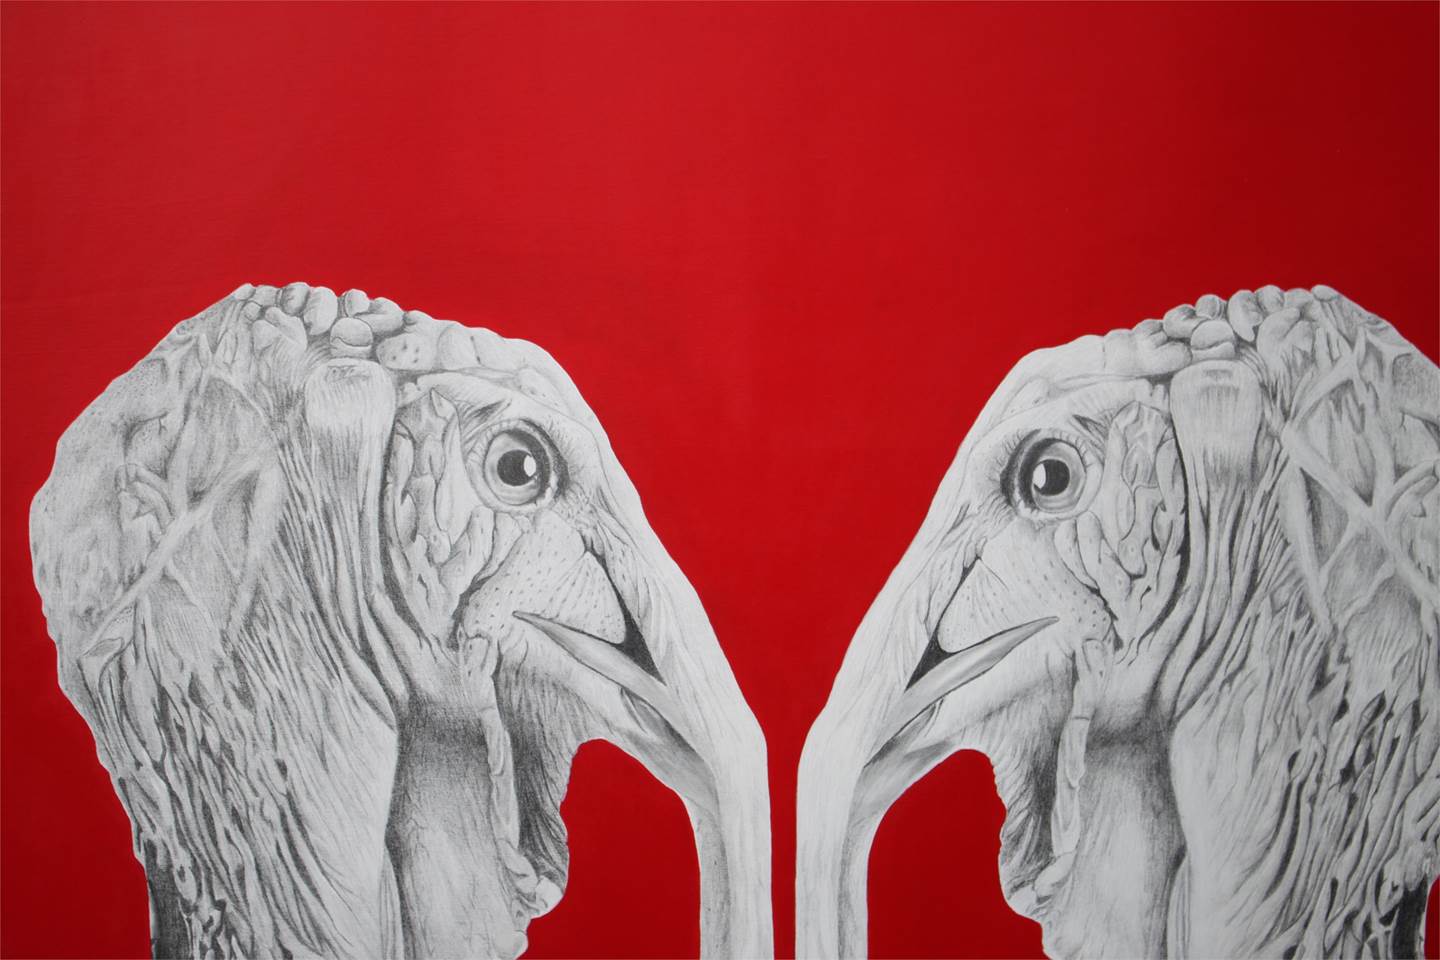 See me Red, original Animals Acrylic Drawing and Illustration by Marisa  Piló